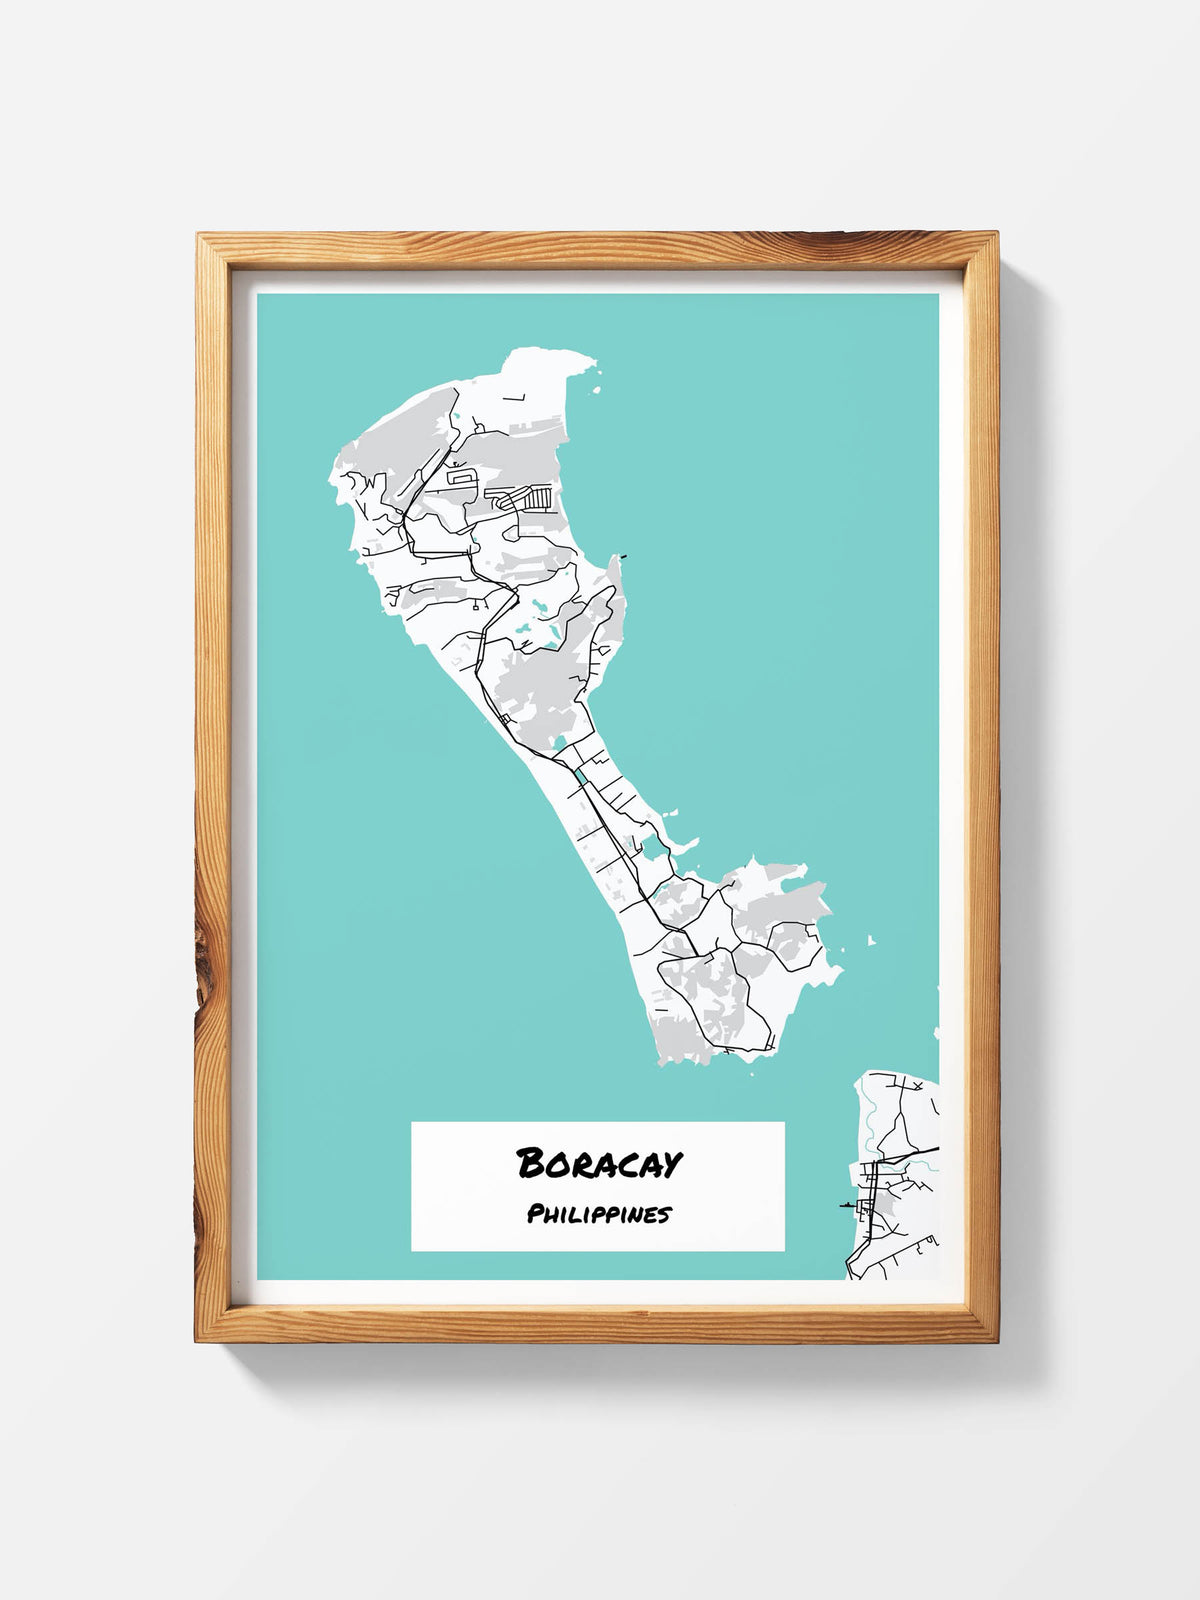 Map art print of Boracay, Philippines on display in an art gallery.